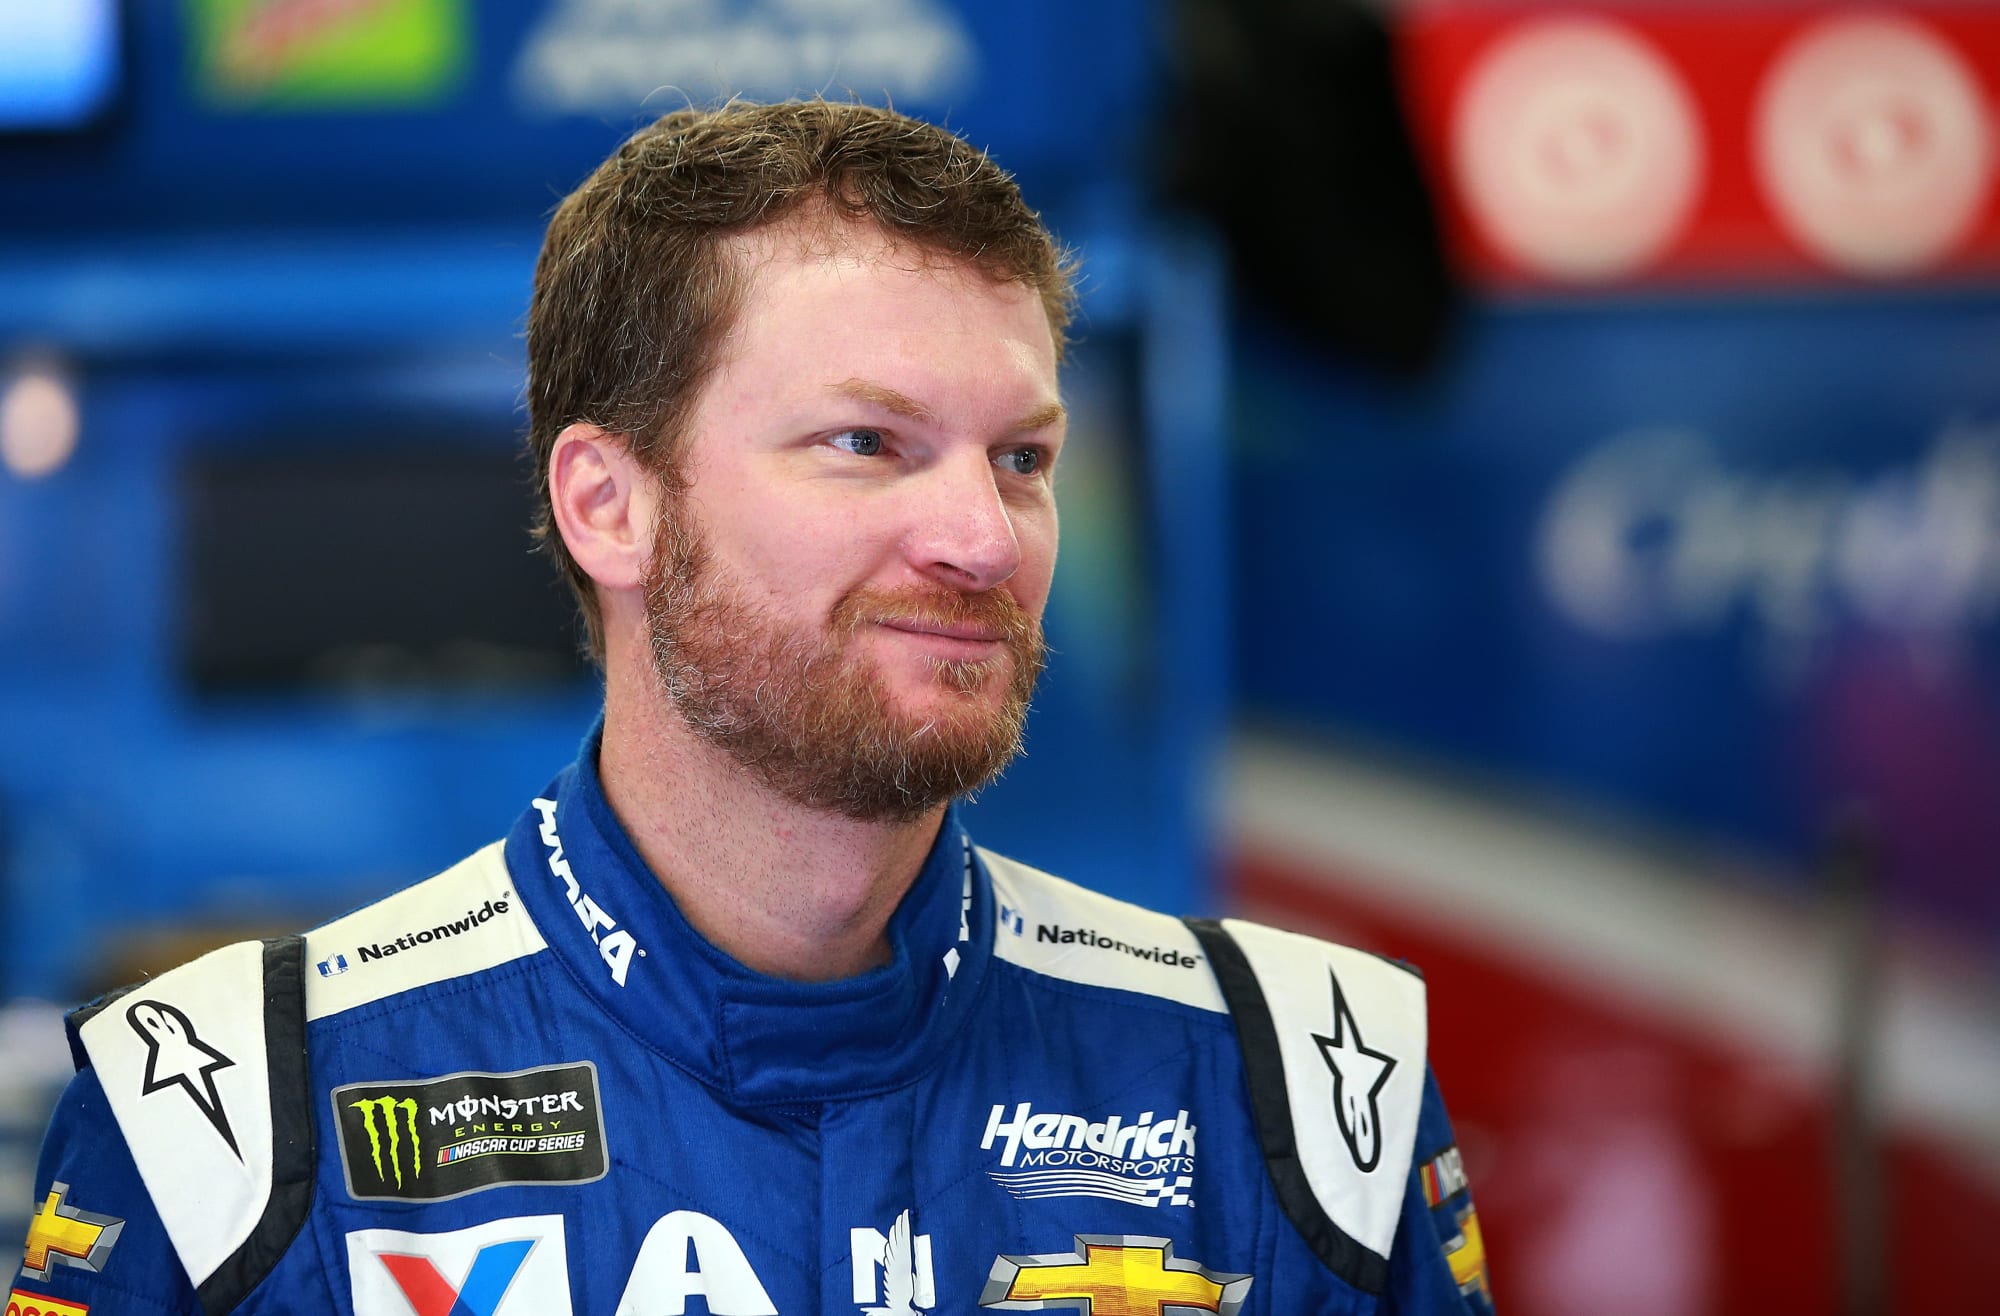 NASCAR's next Most Popular Driver needs to be highly successful